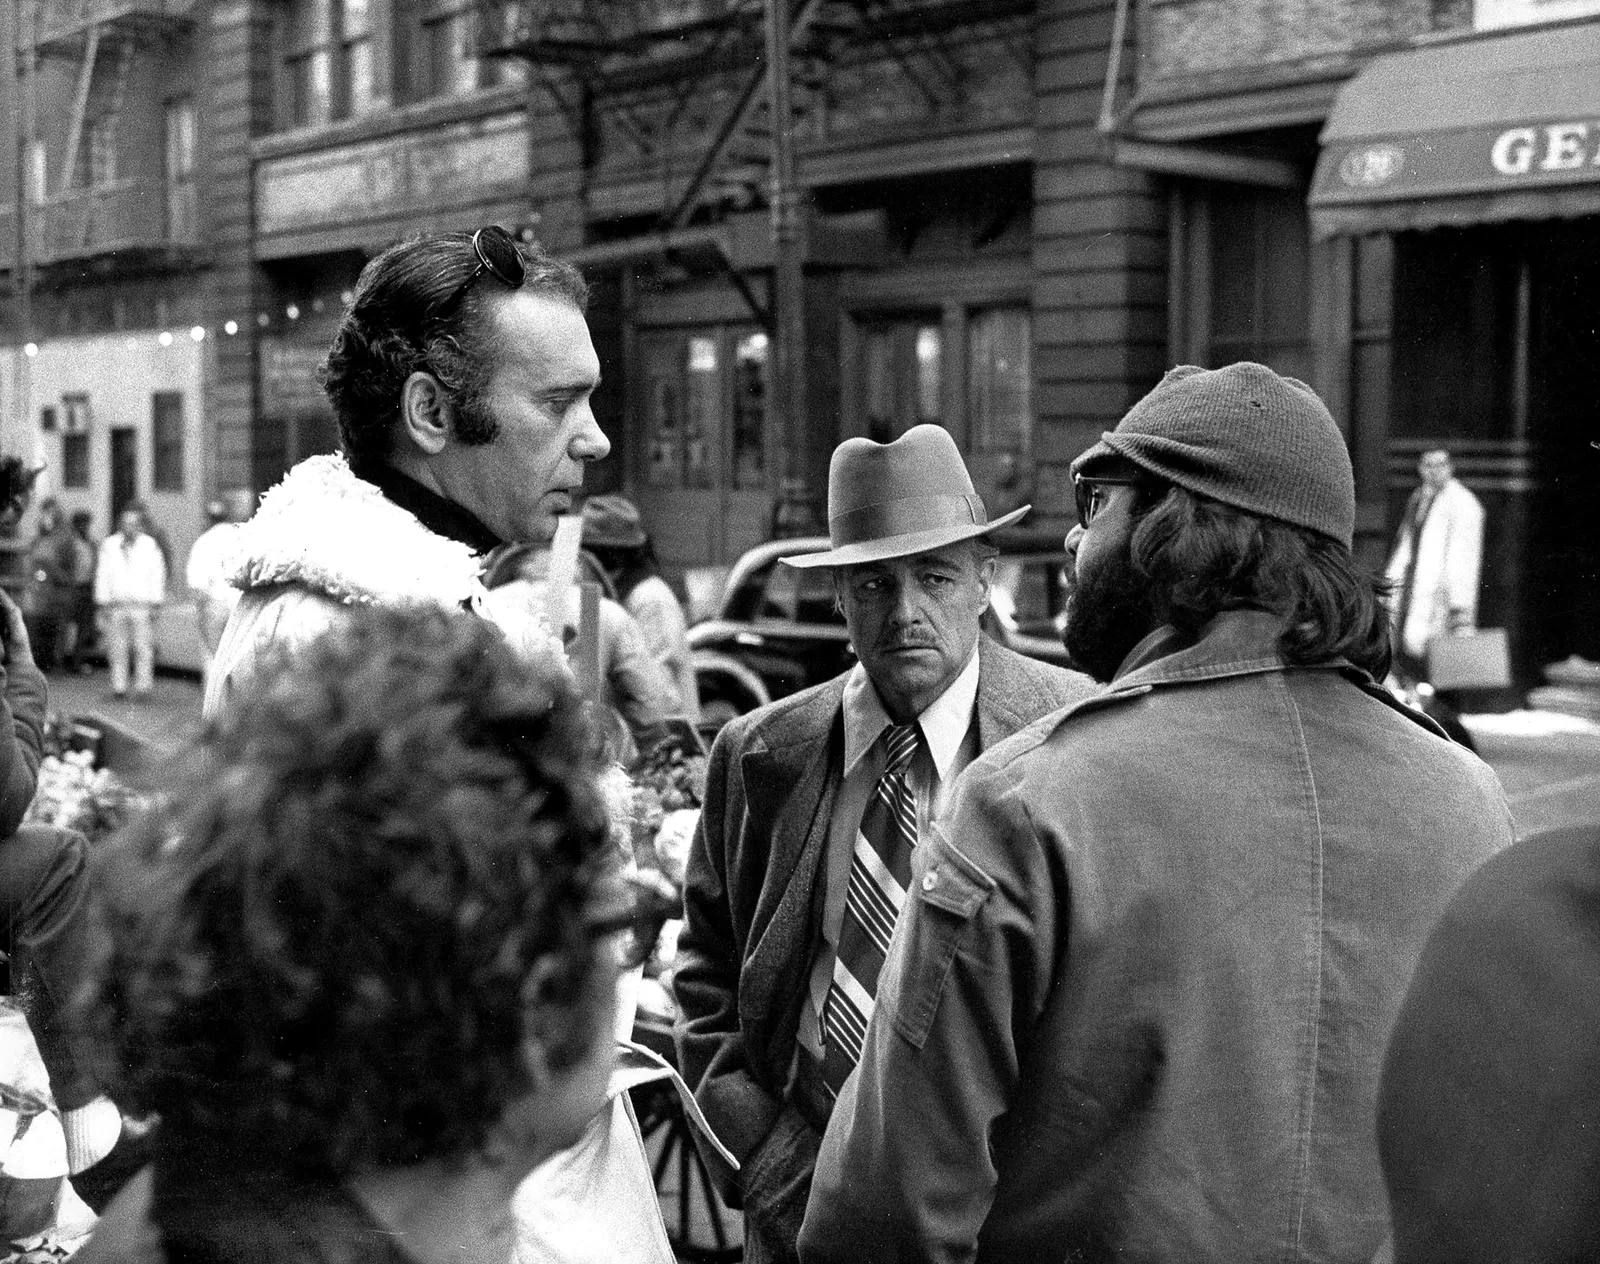 From the set of The Godfather 